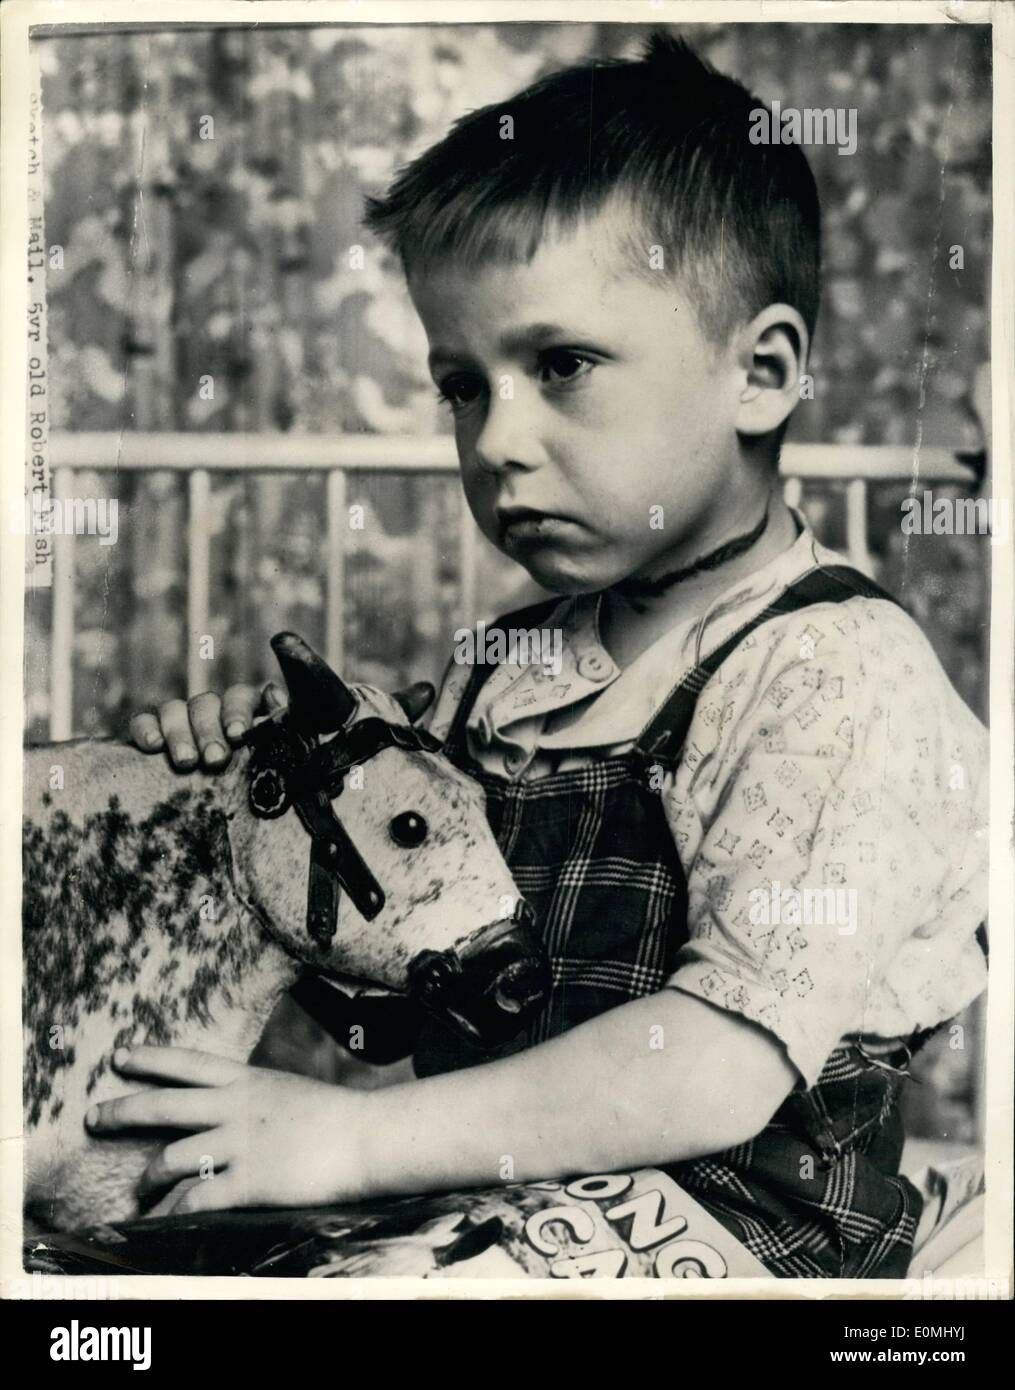 Jun. 06, 1955 - The boy who was found hanging from a tree Narrow escape for bobble five year old Bobbie fish was playing cowboys in a park near his home - when another boy placed a noose around his neck and then gushed off a tree and he was found dangling several feet from the ground. The rope was cut and bobby was rushed to hospital at Blackburn, lance, with neck injuries and suffering from shock, yesterday his mother went to take him home but was told that his temperature had risen and so he must stay in hospital for another day two Stock Photo